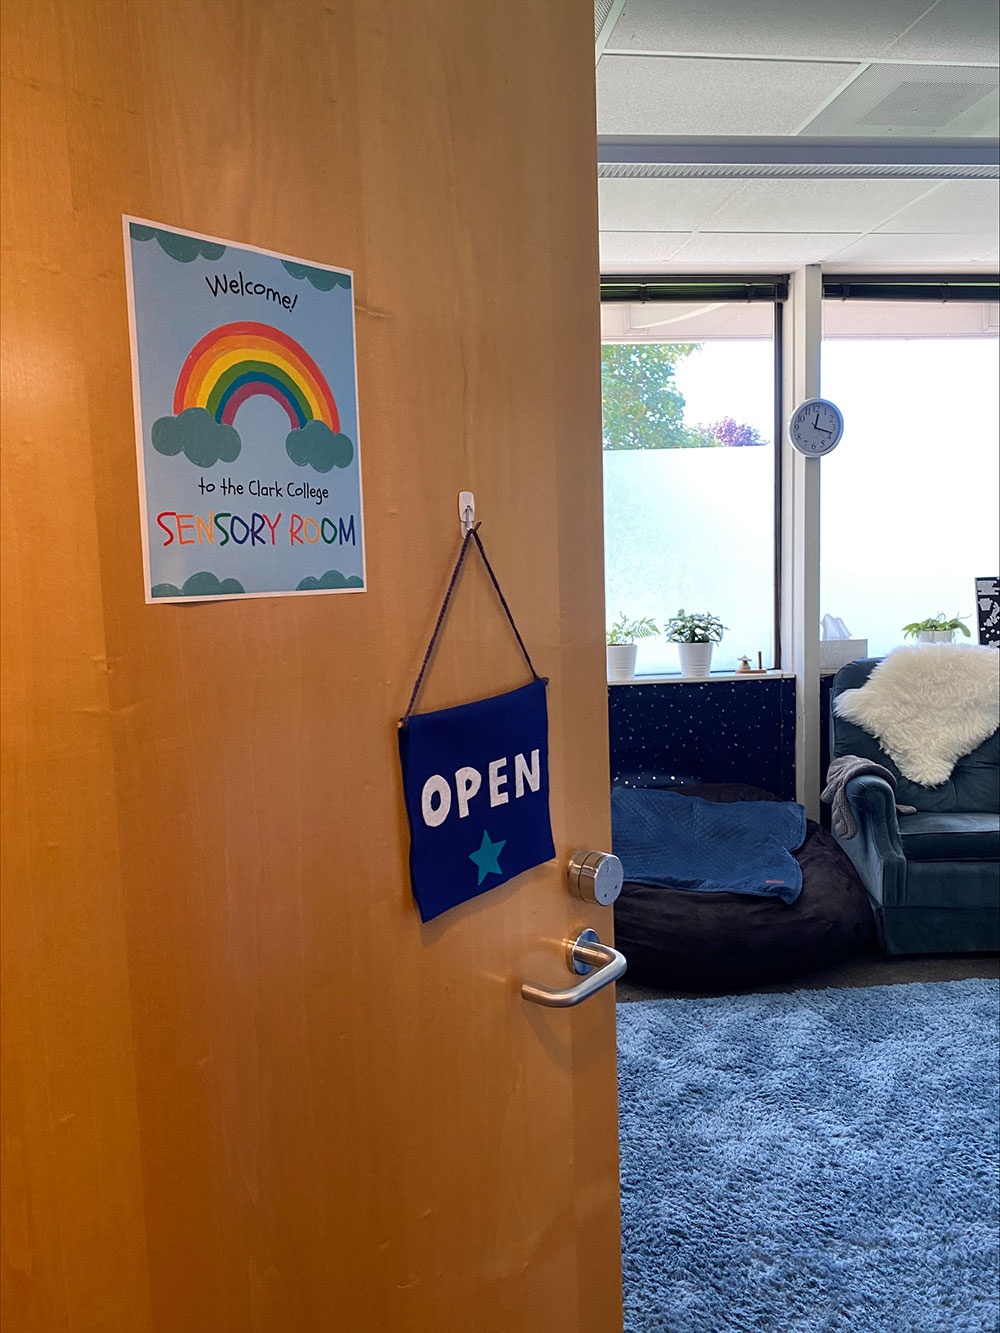 A door adorned with a colorful welcome sign, opening to reveal the interior of the Clark College sensory room.